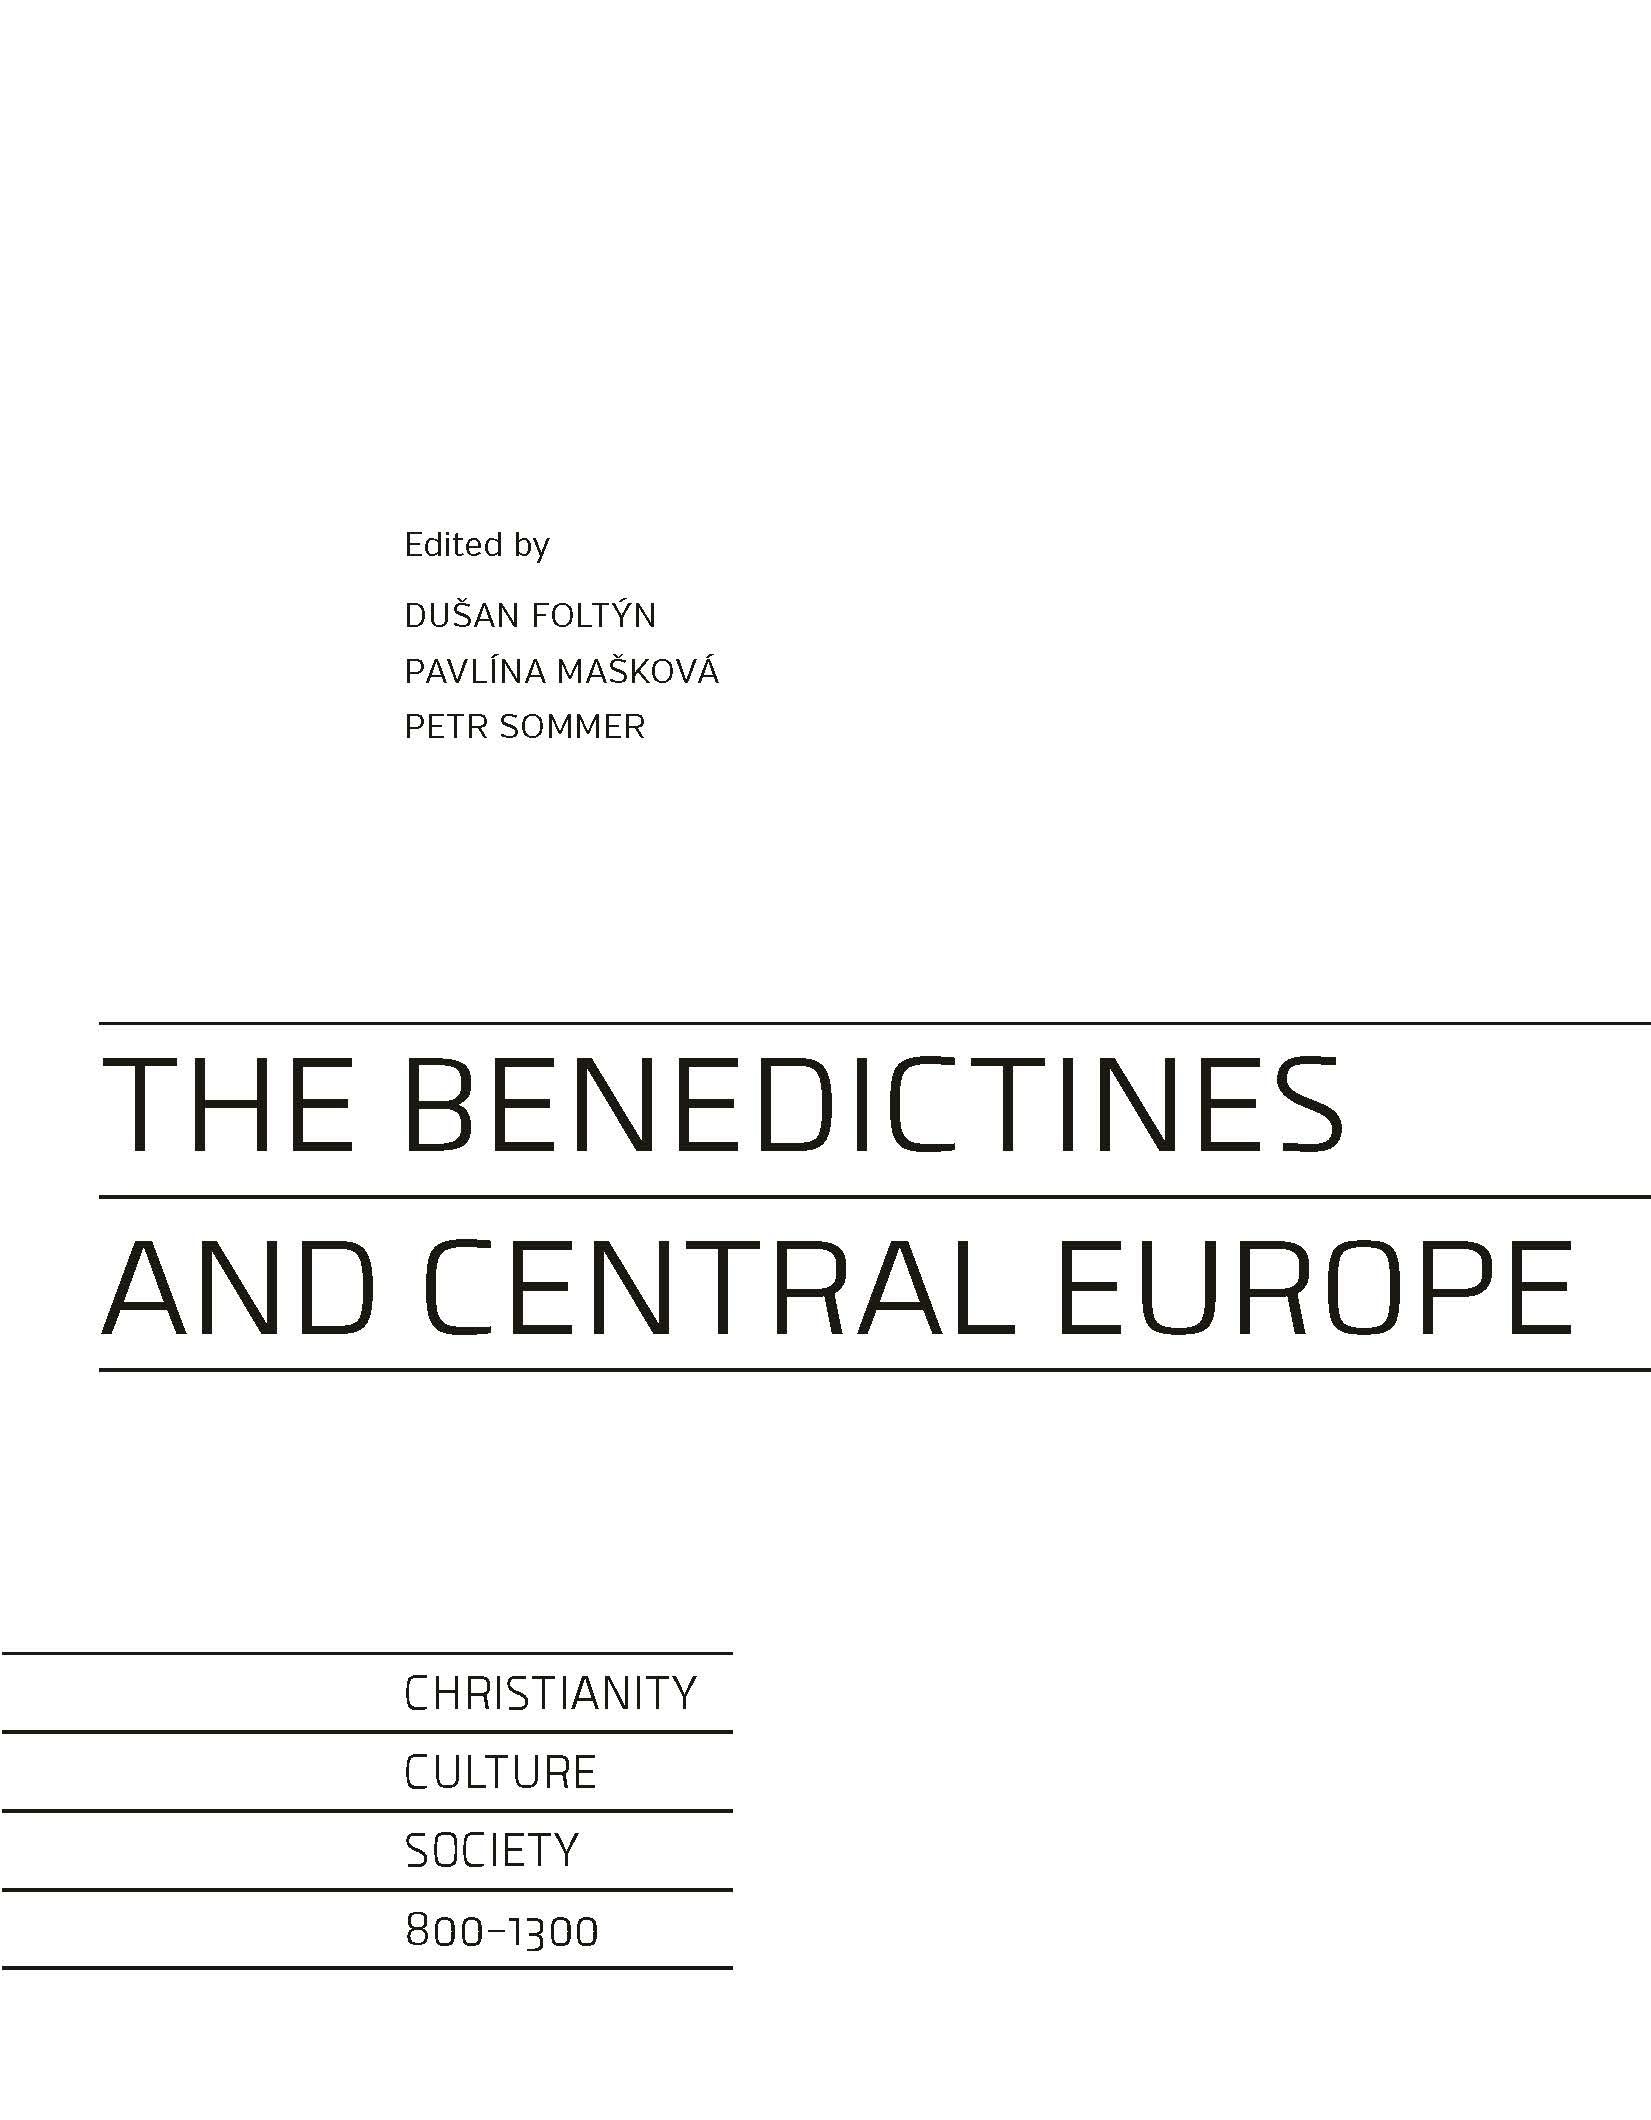 The Benedictins and Central Europe ukázka-1